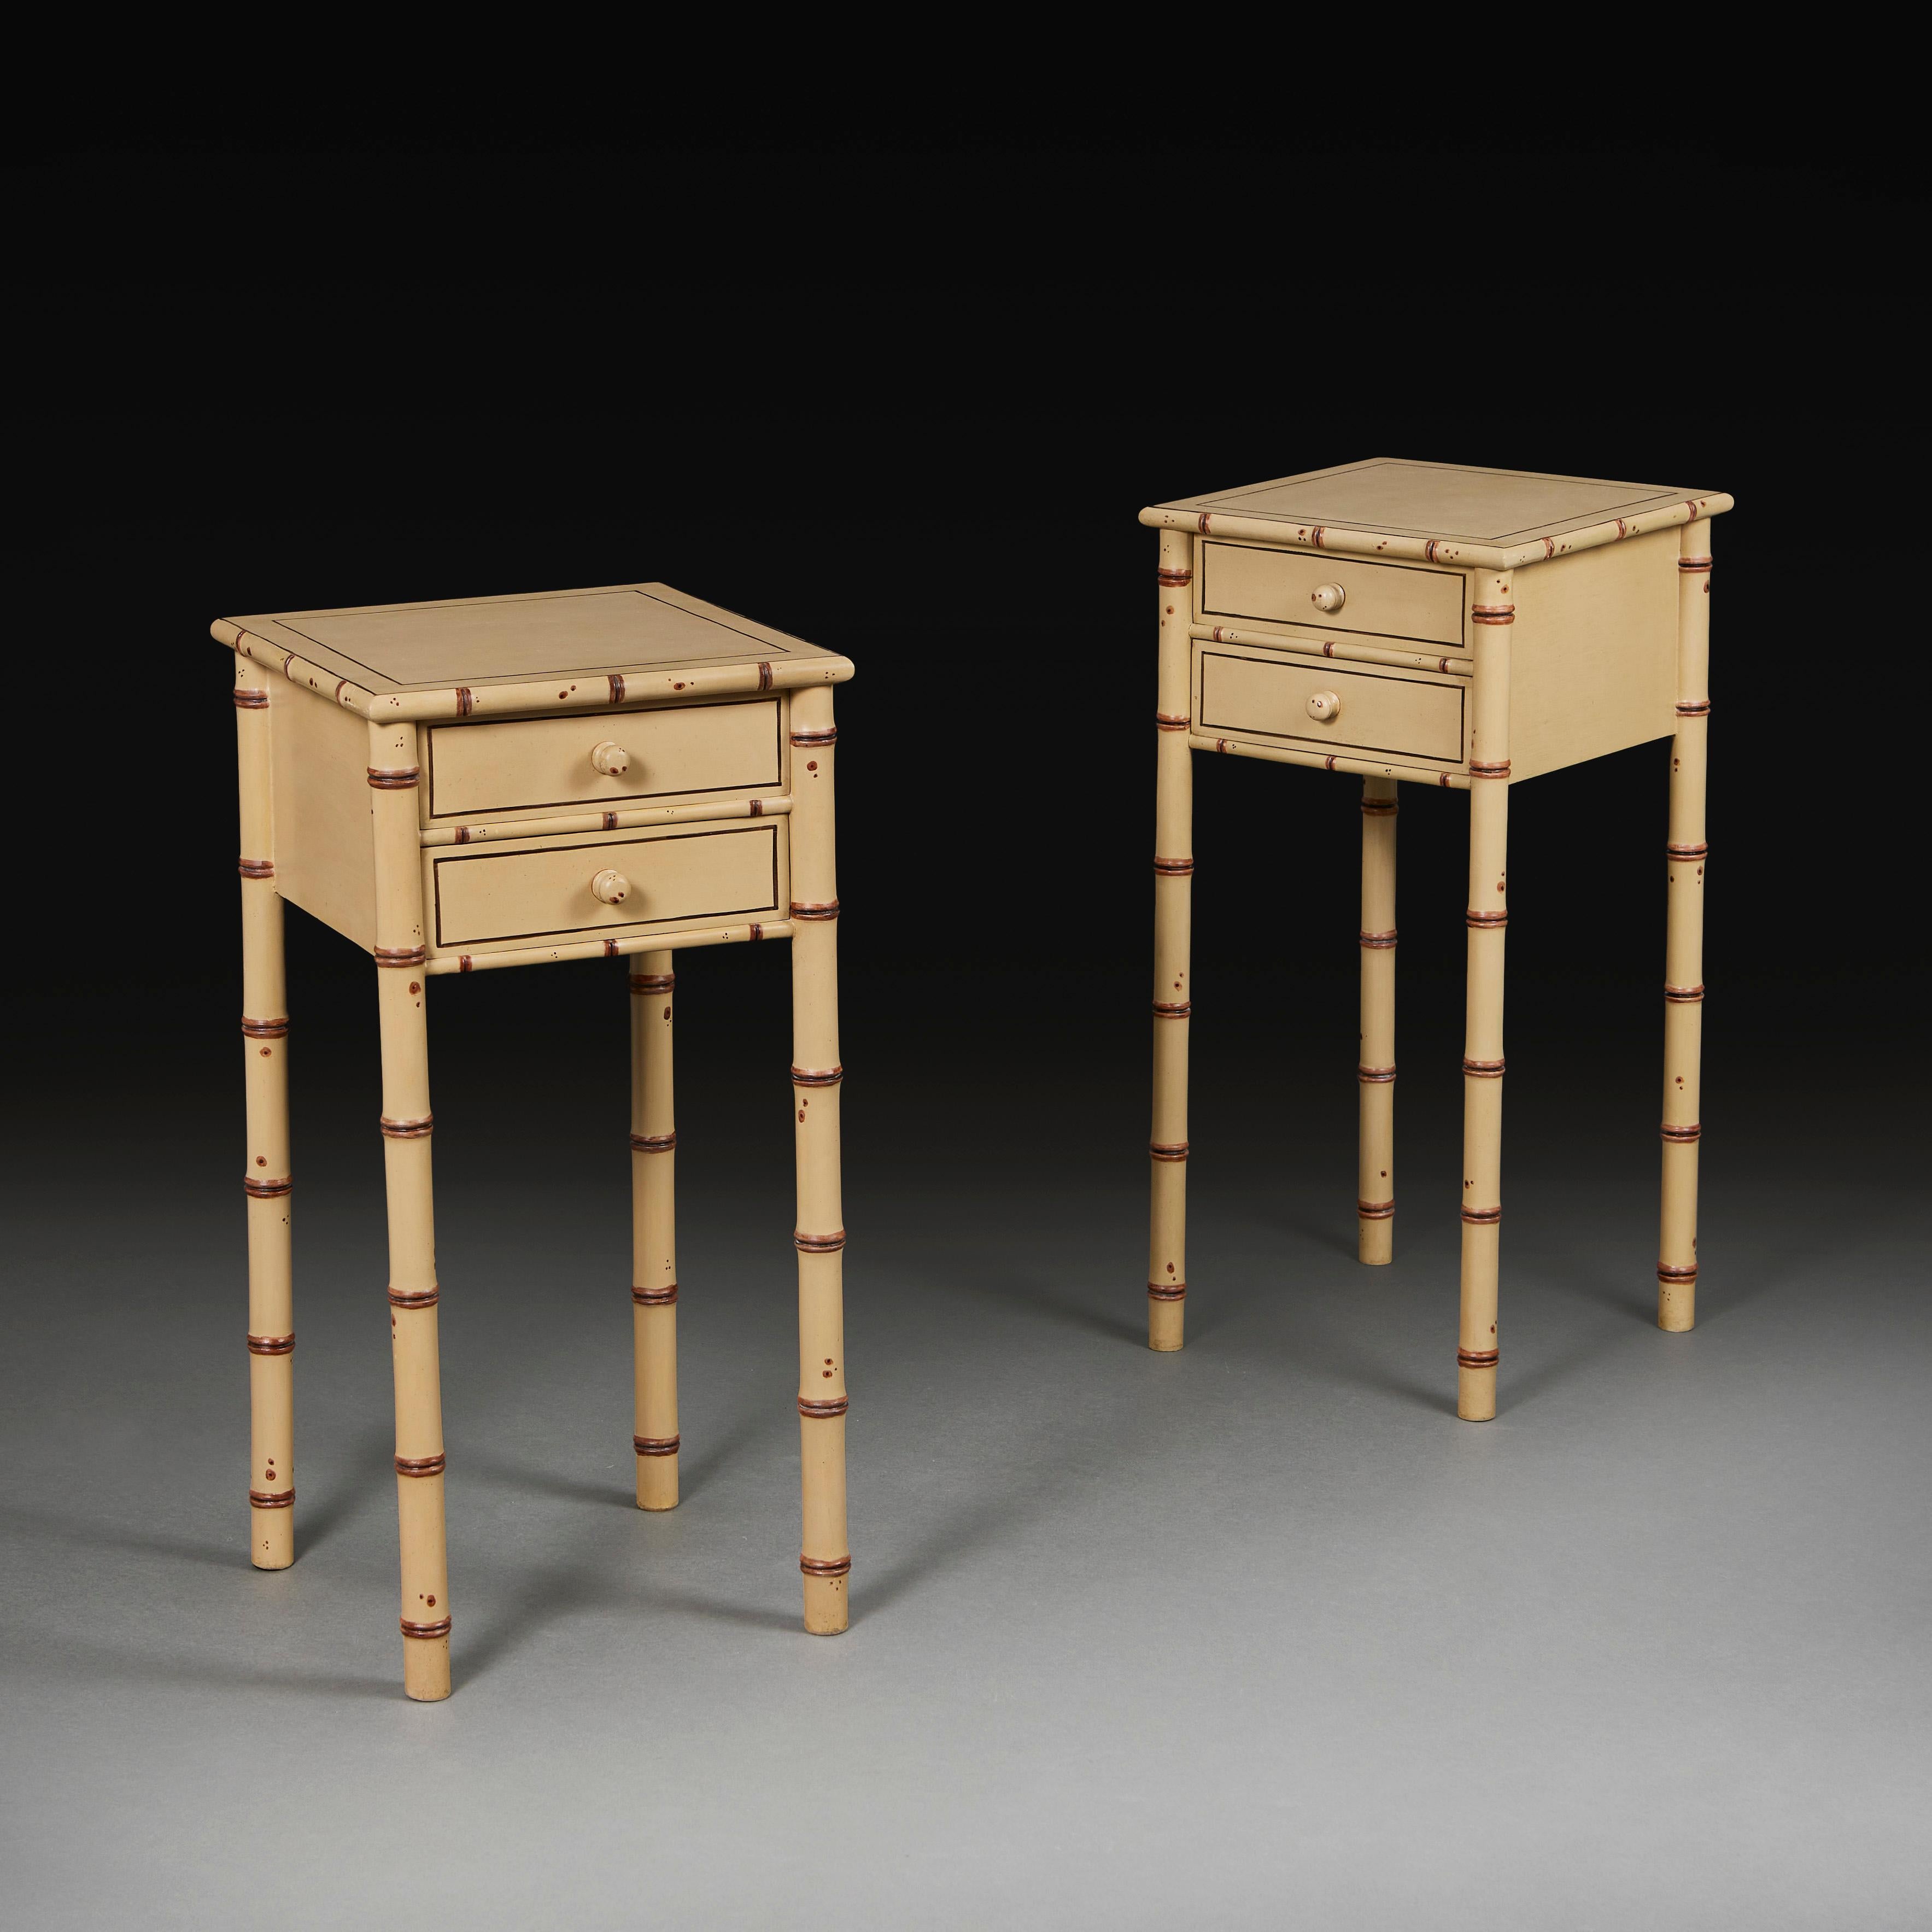 A pair of Edwardian faux bamboo painted bedside tables, painted in cream and brown to simulate bamboo wood, of square form, each opening with two drawers to the front, supported on four bamboo legs.